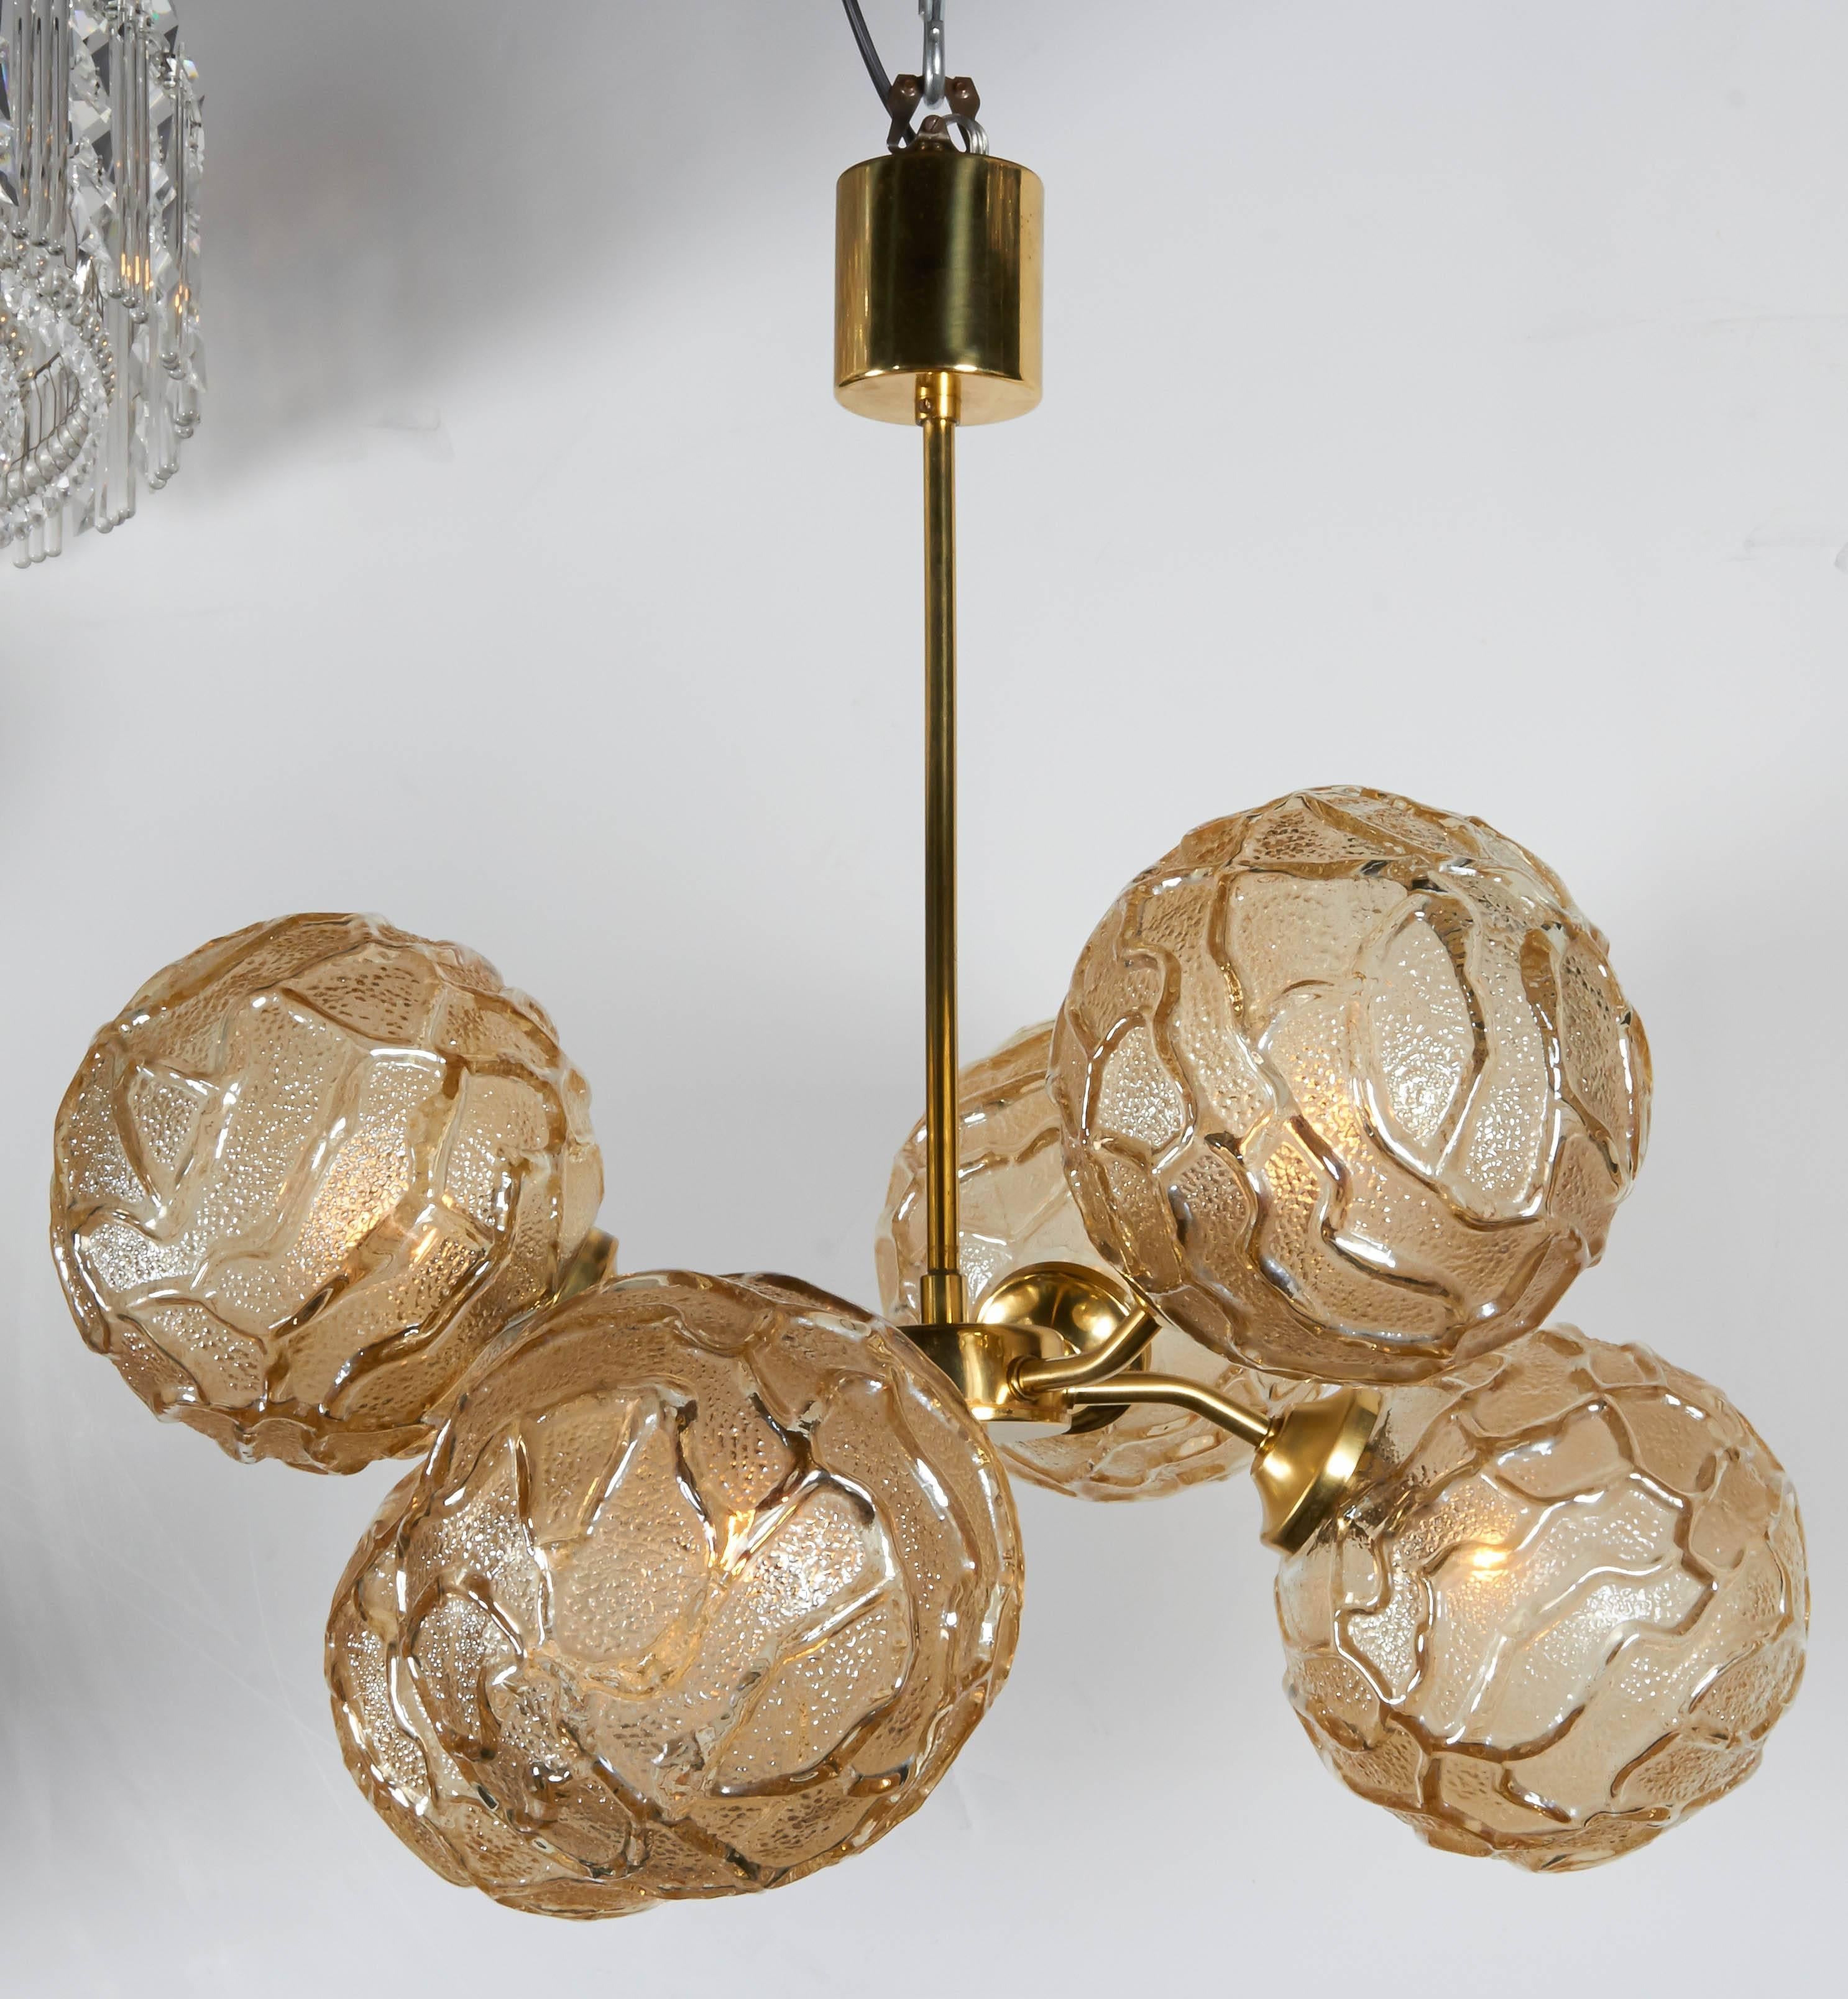 Mid-century modern sputnik globe chandelier with brass atomic frame design. The fixture has an elegant stem and cylinder canopy, with alternating arm design.  Fitted with six textured art glass globes with geometric patterns in hues of champagne or